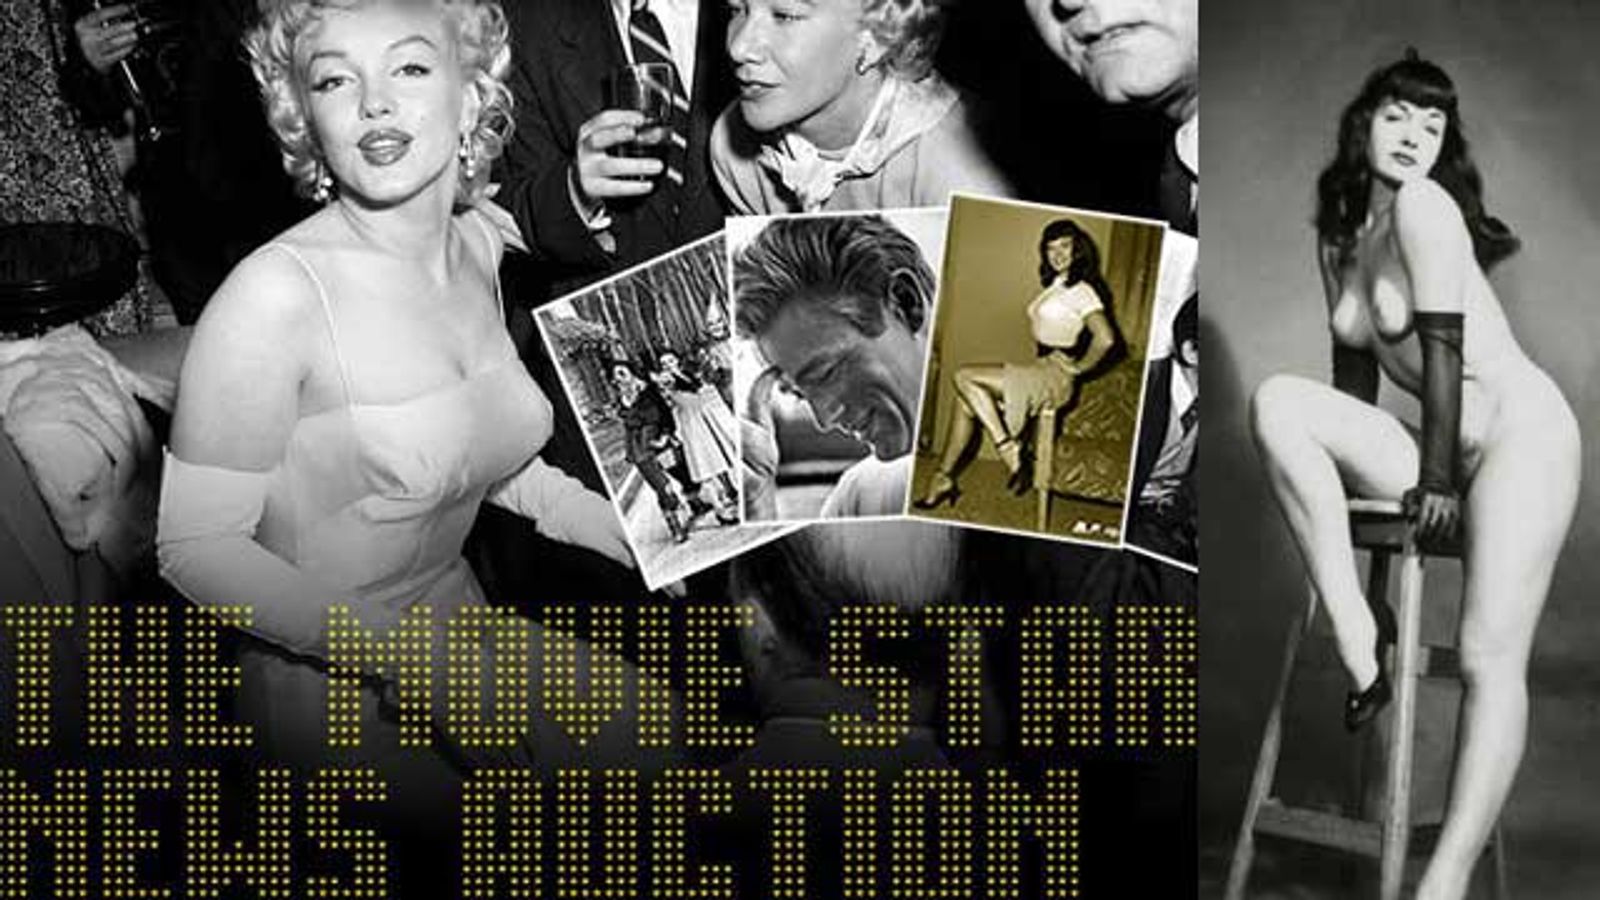 Upcoming Auctions & Sales Feature Bettie Page Material